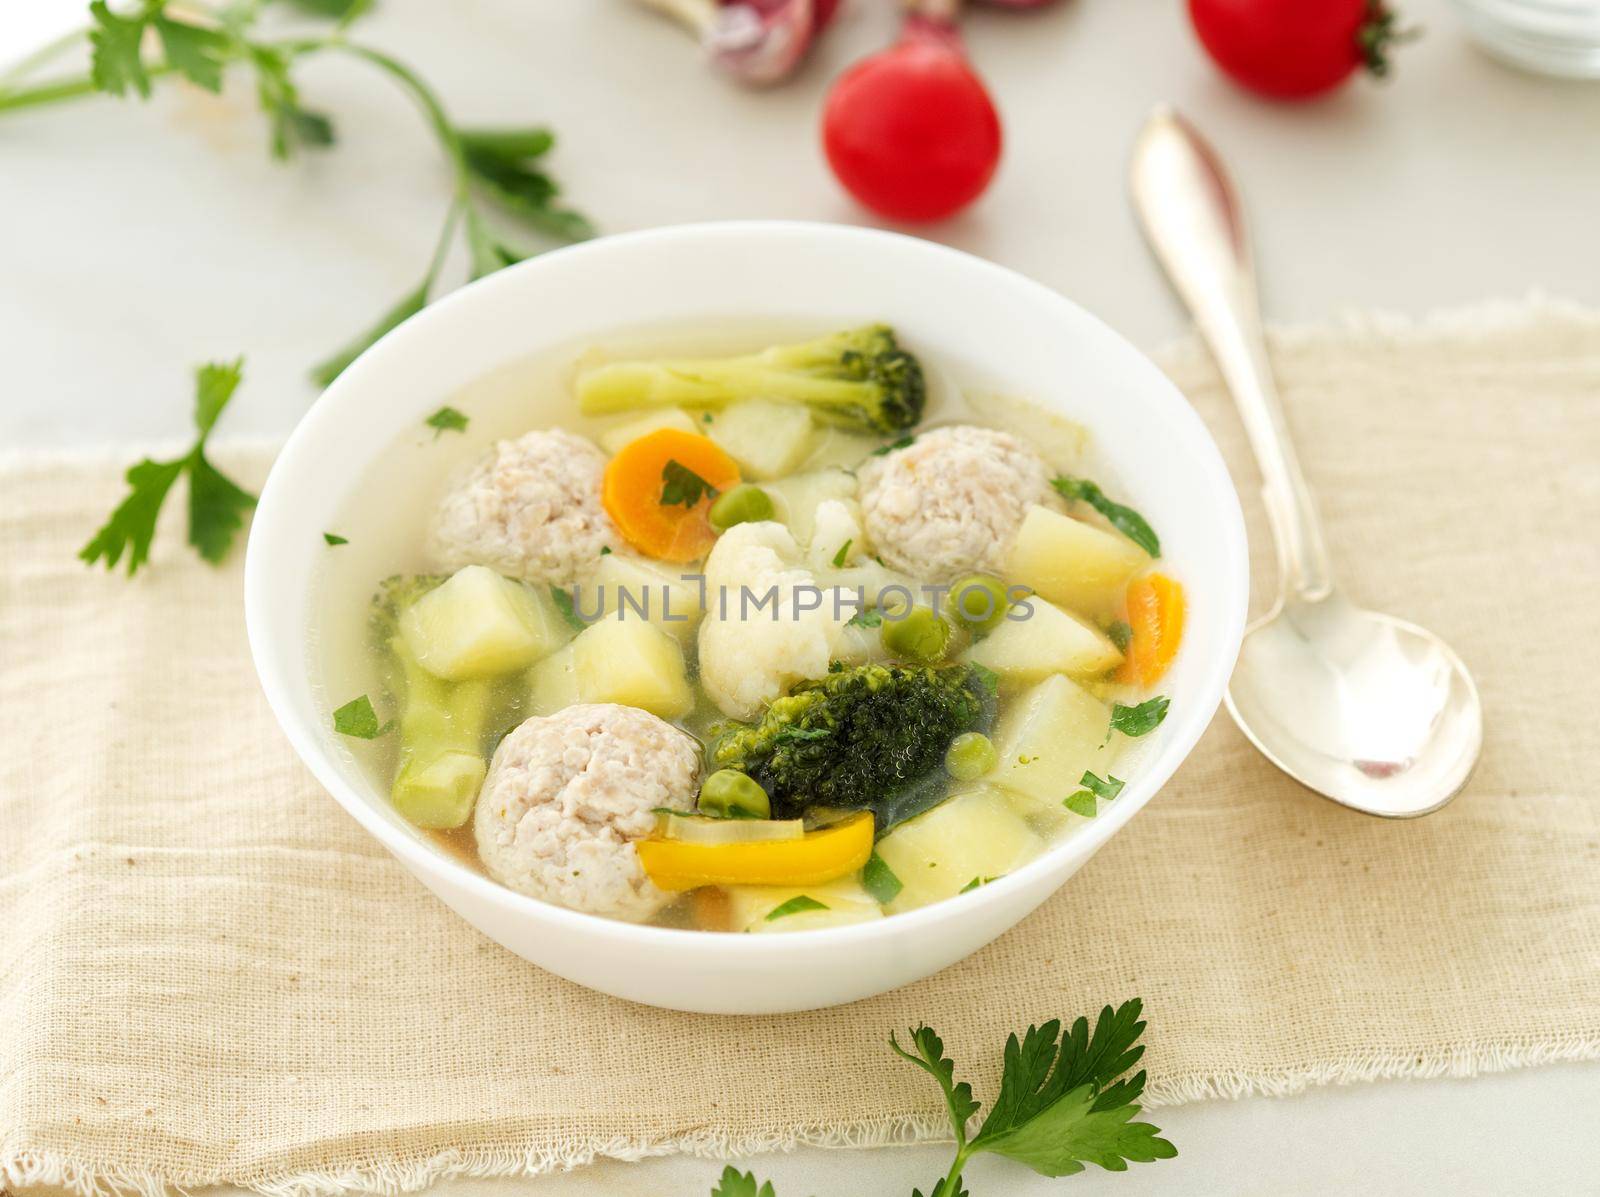 bowl of soup, a cup of broth and vegetables, meatballs made of turkey and a chicken, side view